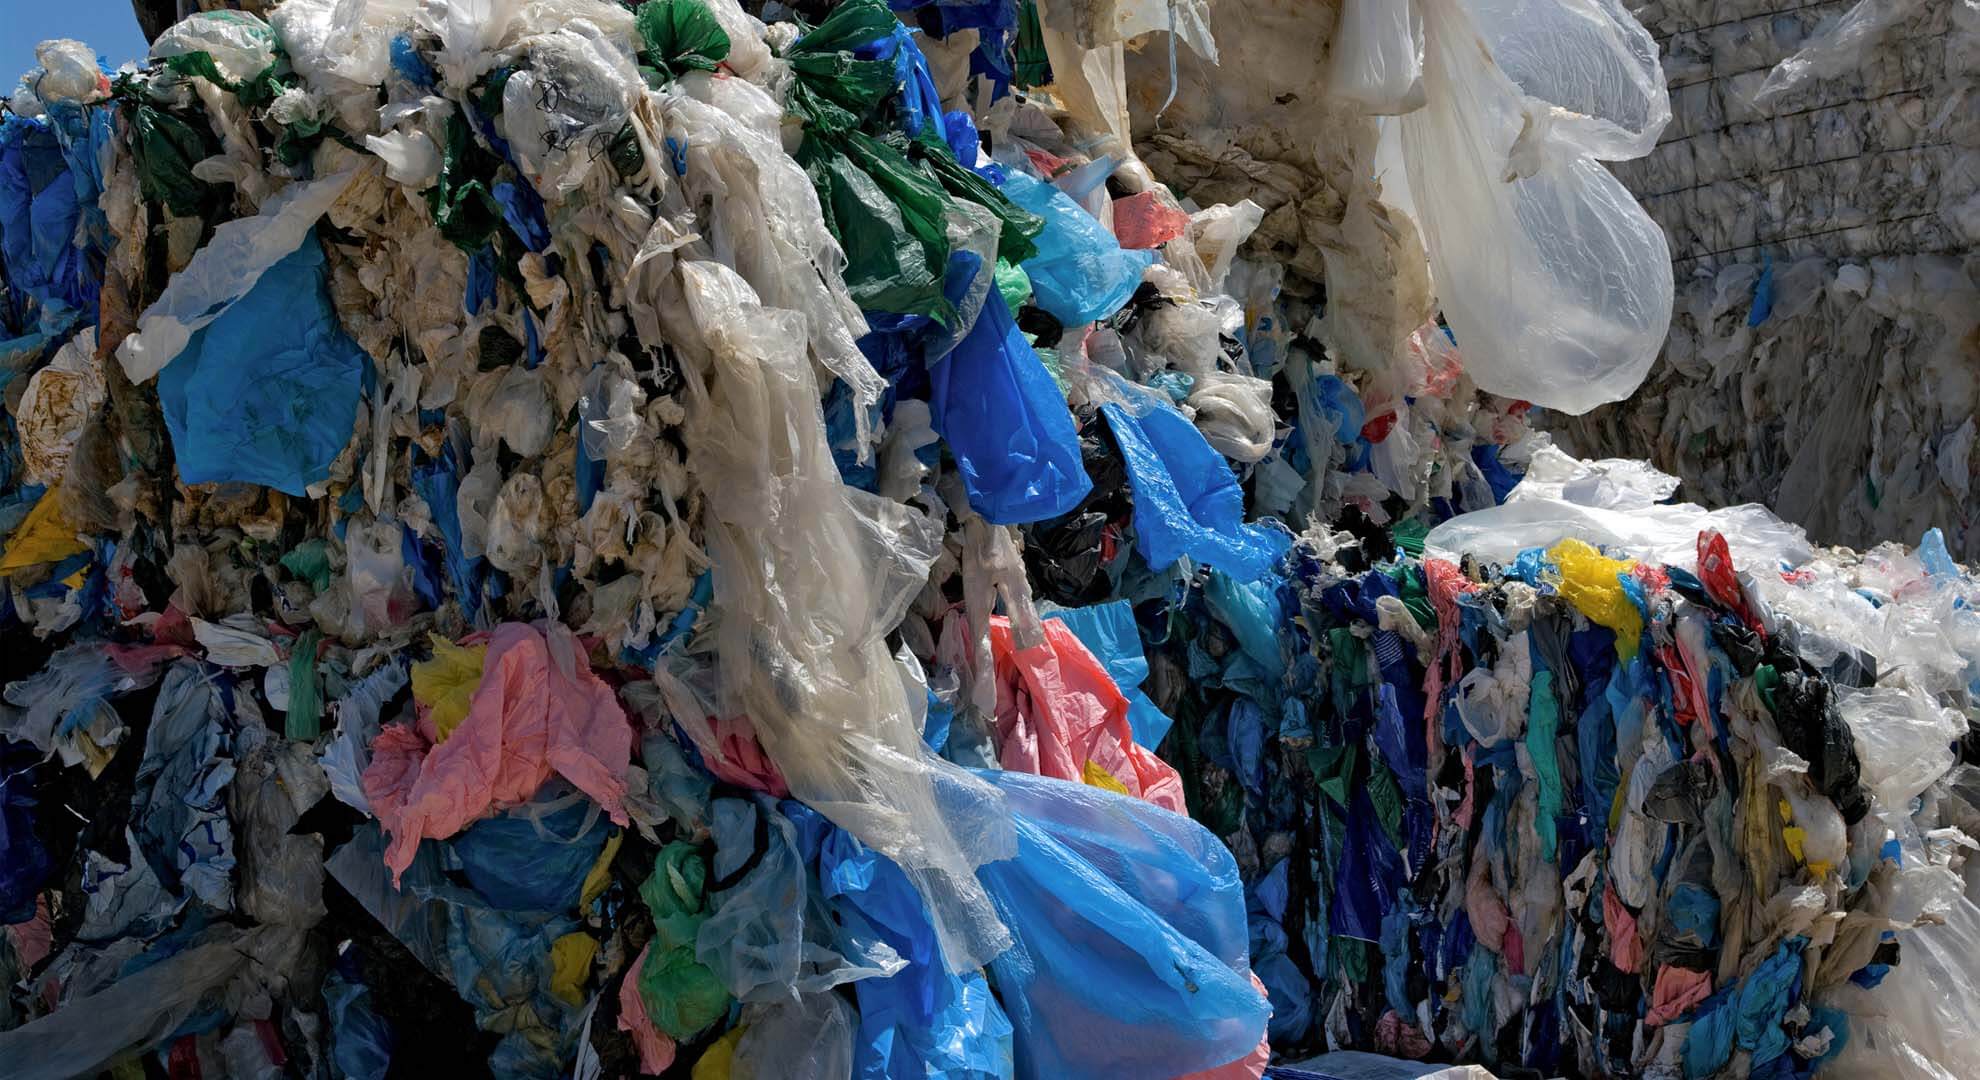 Every year 5 trillion single-use plastic bags are thrown away